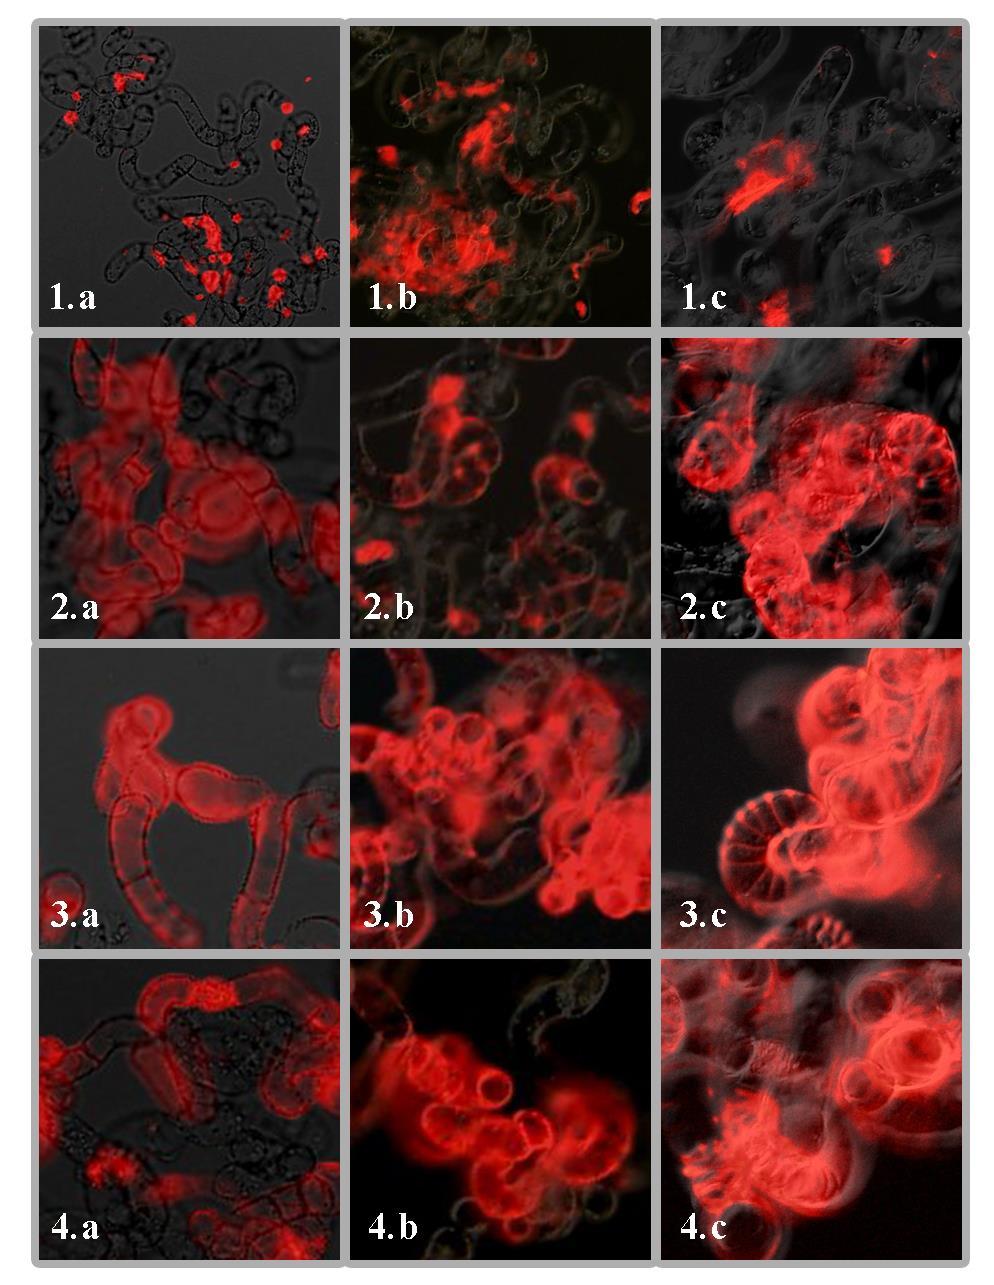 Figure 3: Extent of differentiation in cultured cells. Red colour shows the presence of secondary cell wall. 1.a,1.b,1.c: Control cells(uninduced) at 23h, 25h and 43h respectively. 2.a,2.